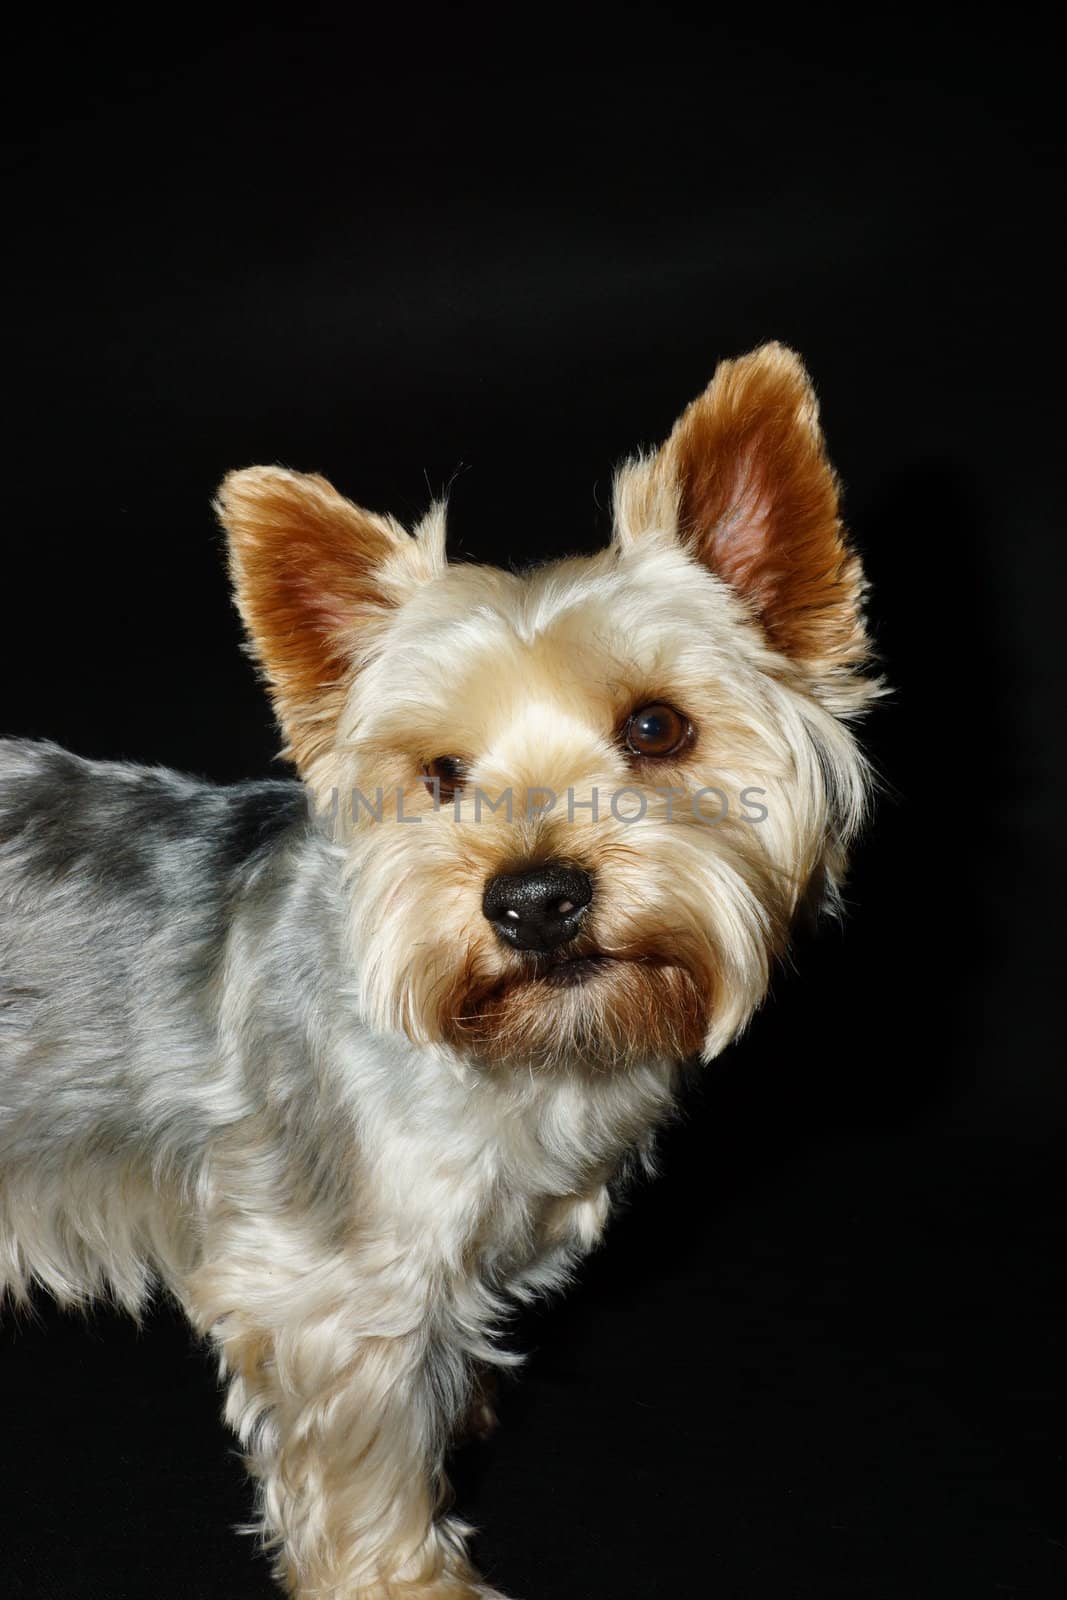 A dog (Yorkshire terrier) on a black background with a funny and curious eyes